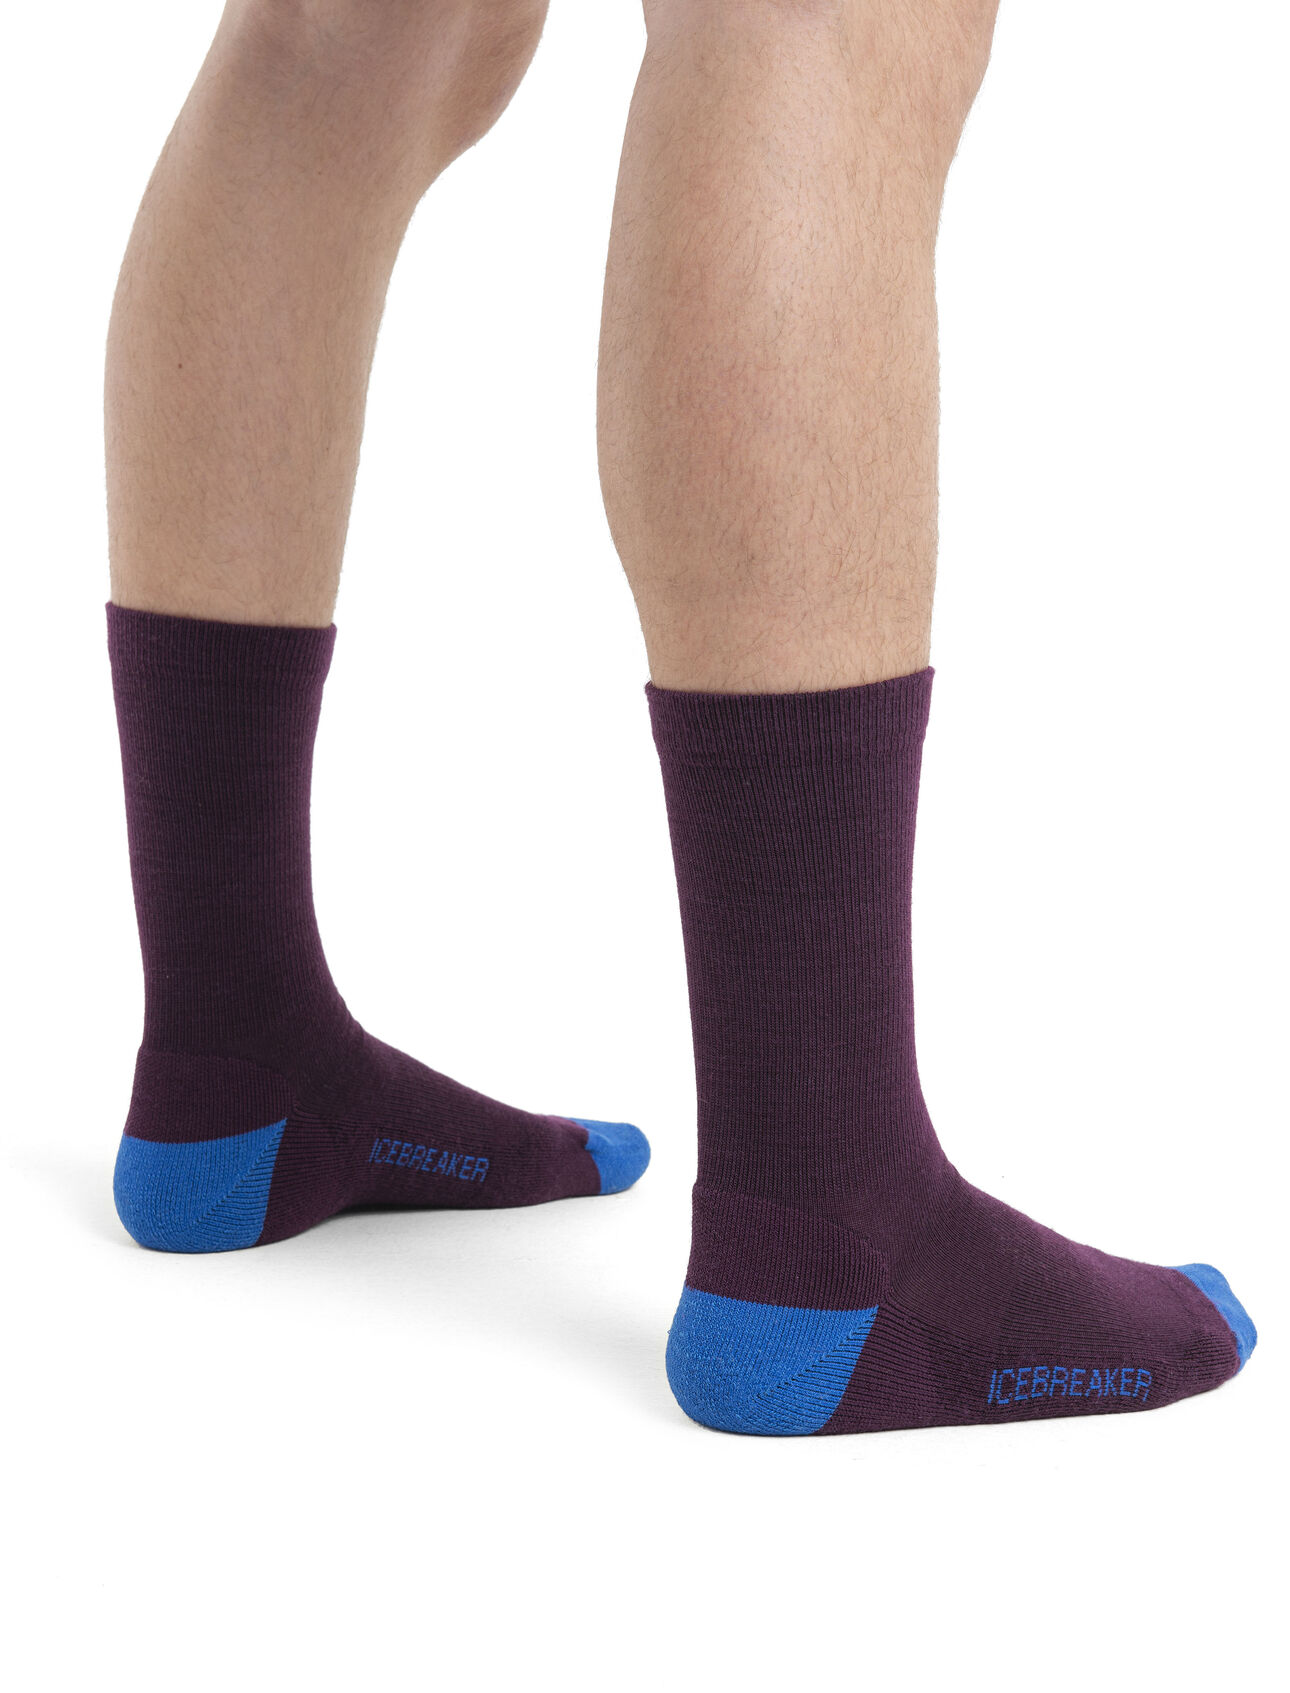 Crew socks — what are they, and do you need them?